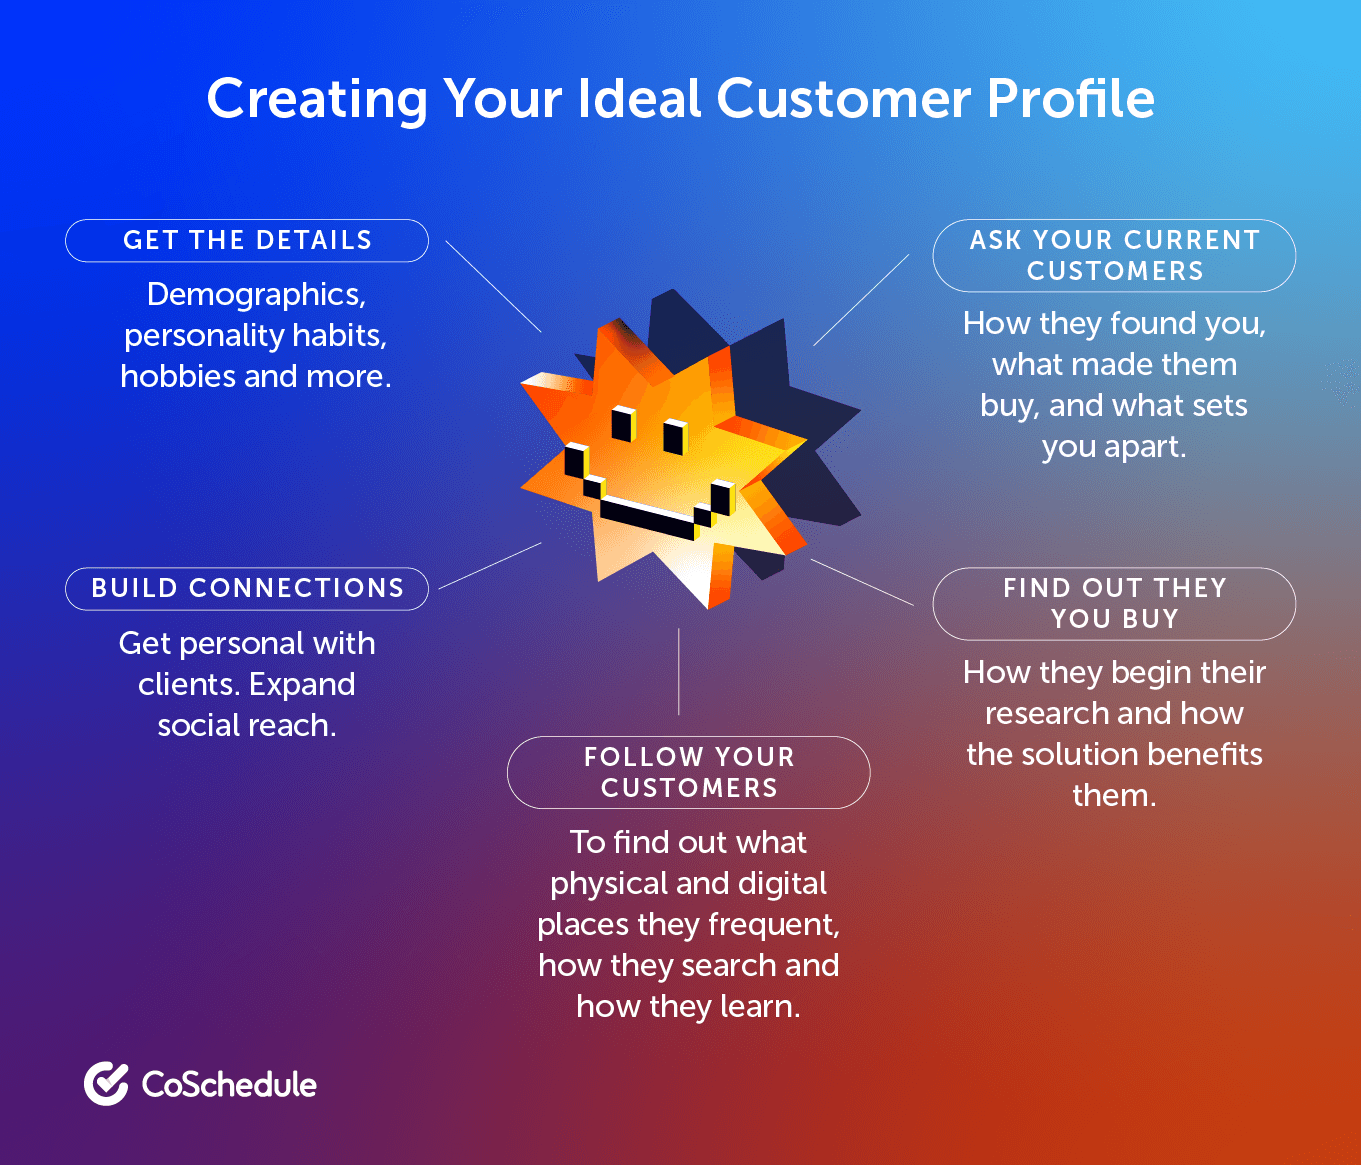 CoSchedules "creating your ideal customer profile" which has get the details, build connections, follow your customers, find out they you buy, and ask your current customers.